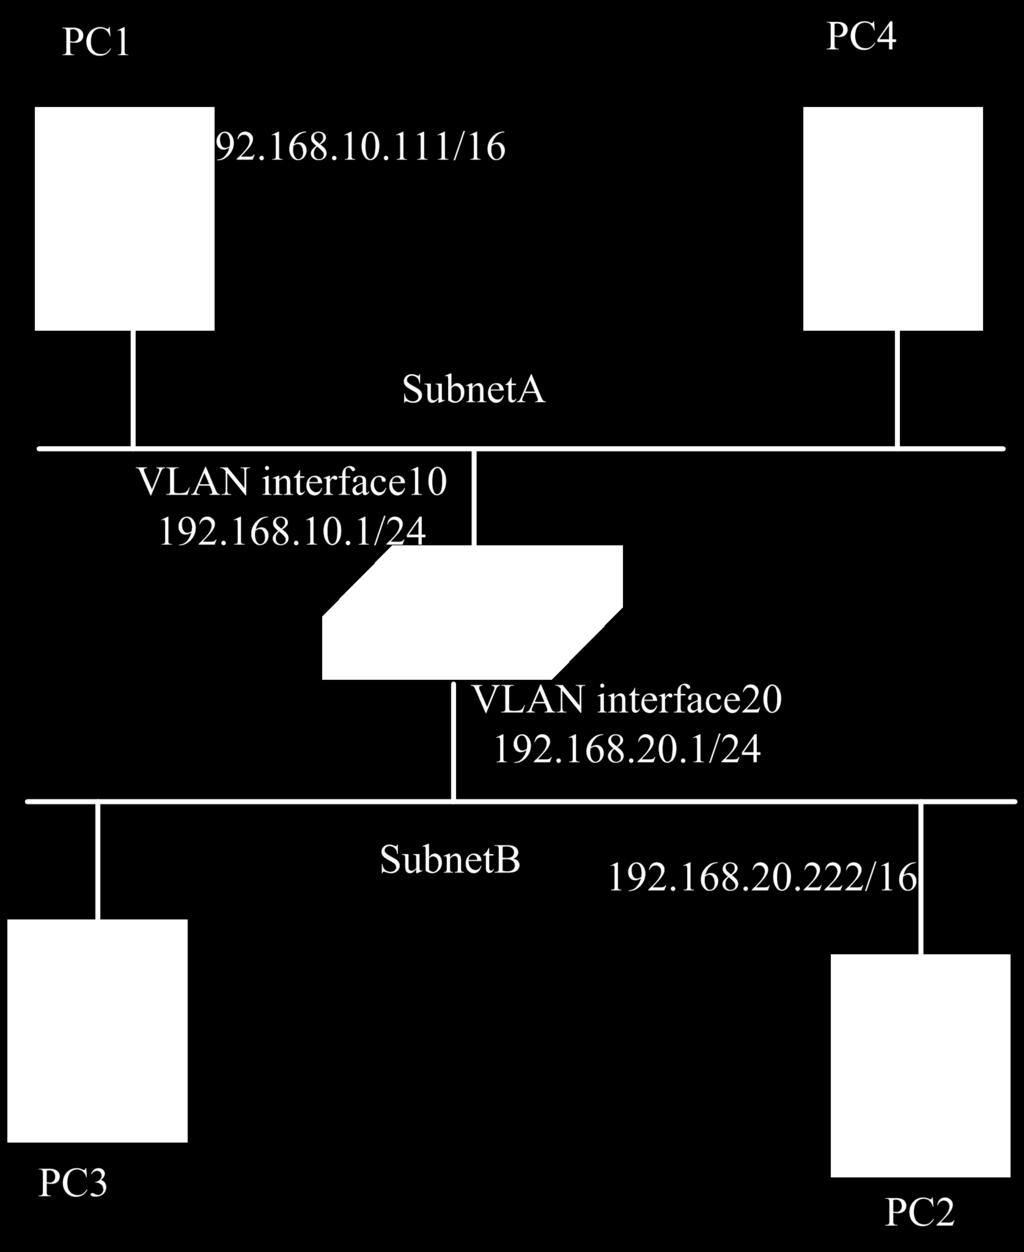 2.2 Configuring ARP Proxy 2.2.1 Topology Figure 2-1 ARP Proxy topology 2.2.2 Configuration As seen in the above topology, PC1 is belong to VLAN10 and PC2 is belong to VLAN20.